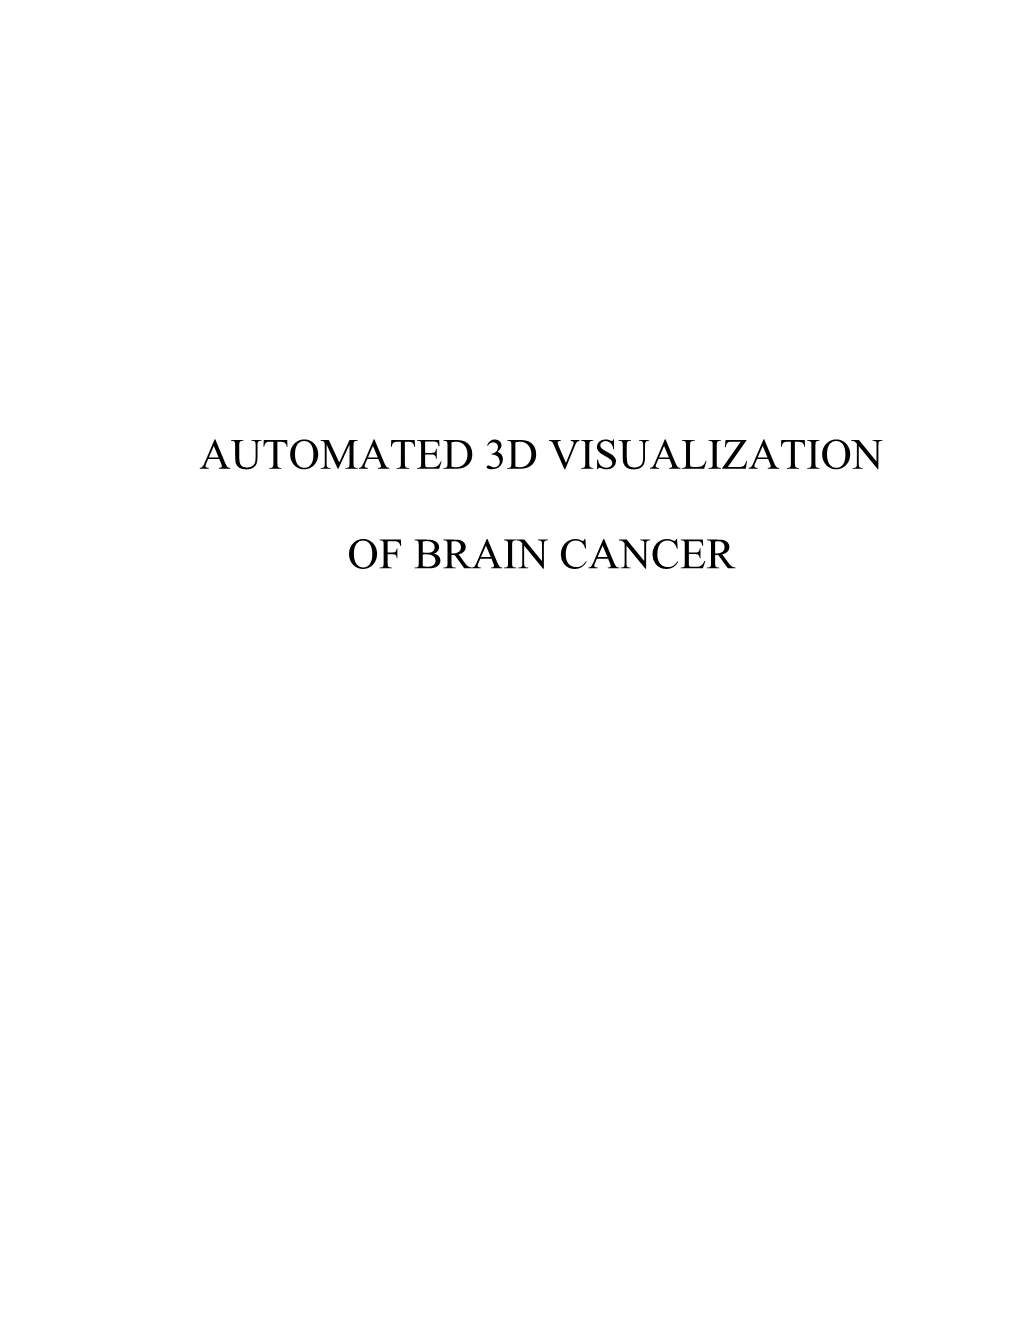 Automated 3D Visualization of Brain Cancer